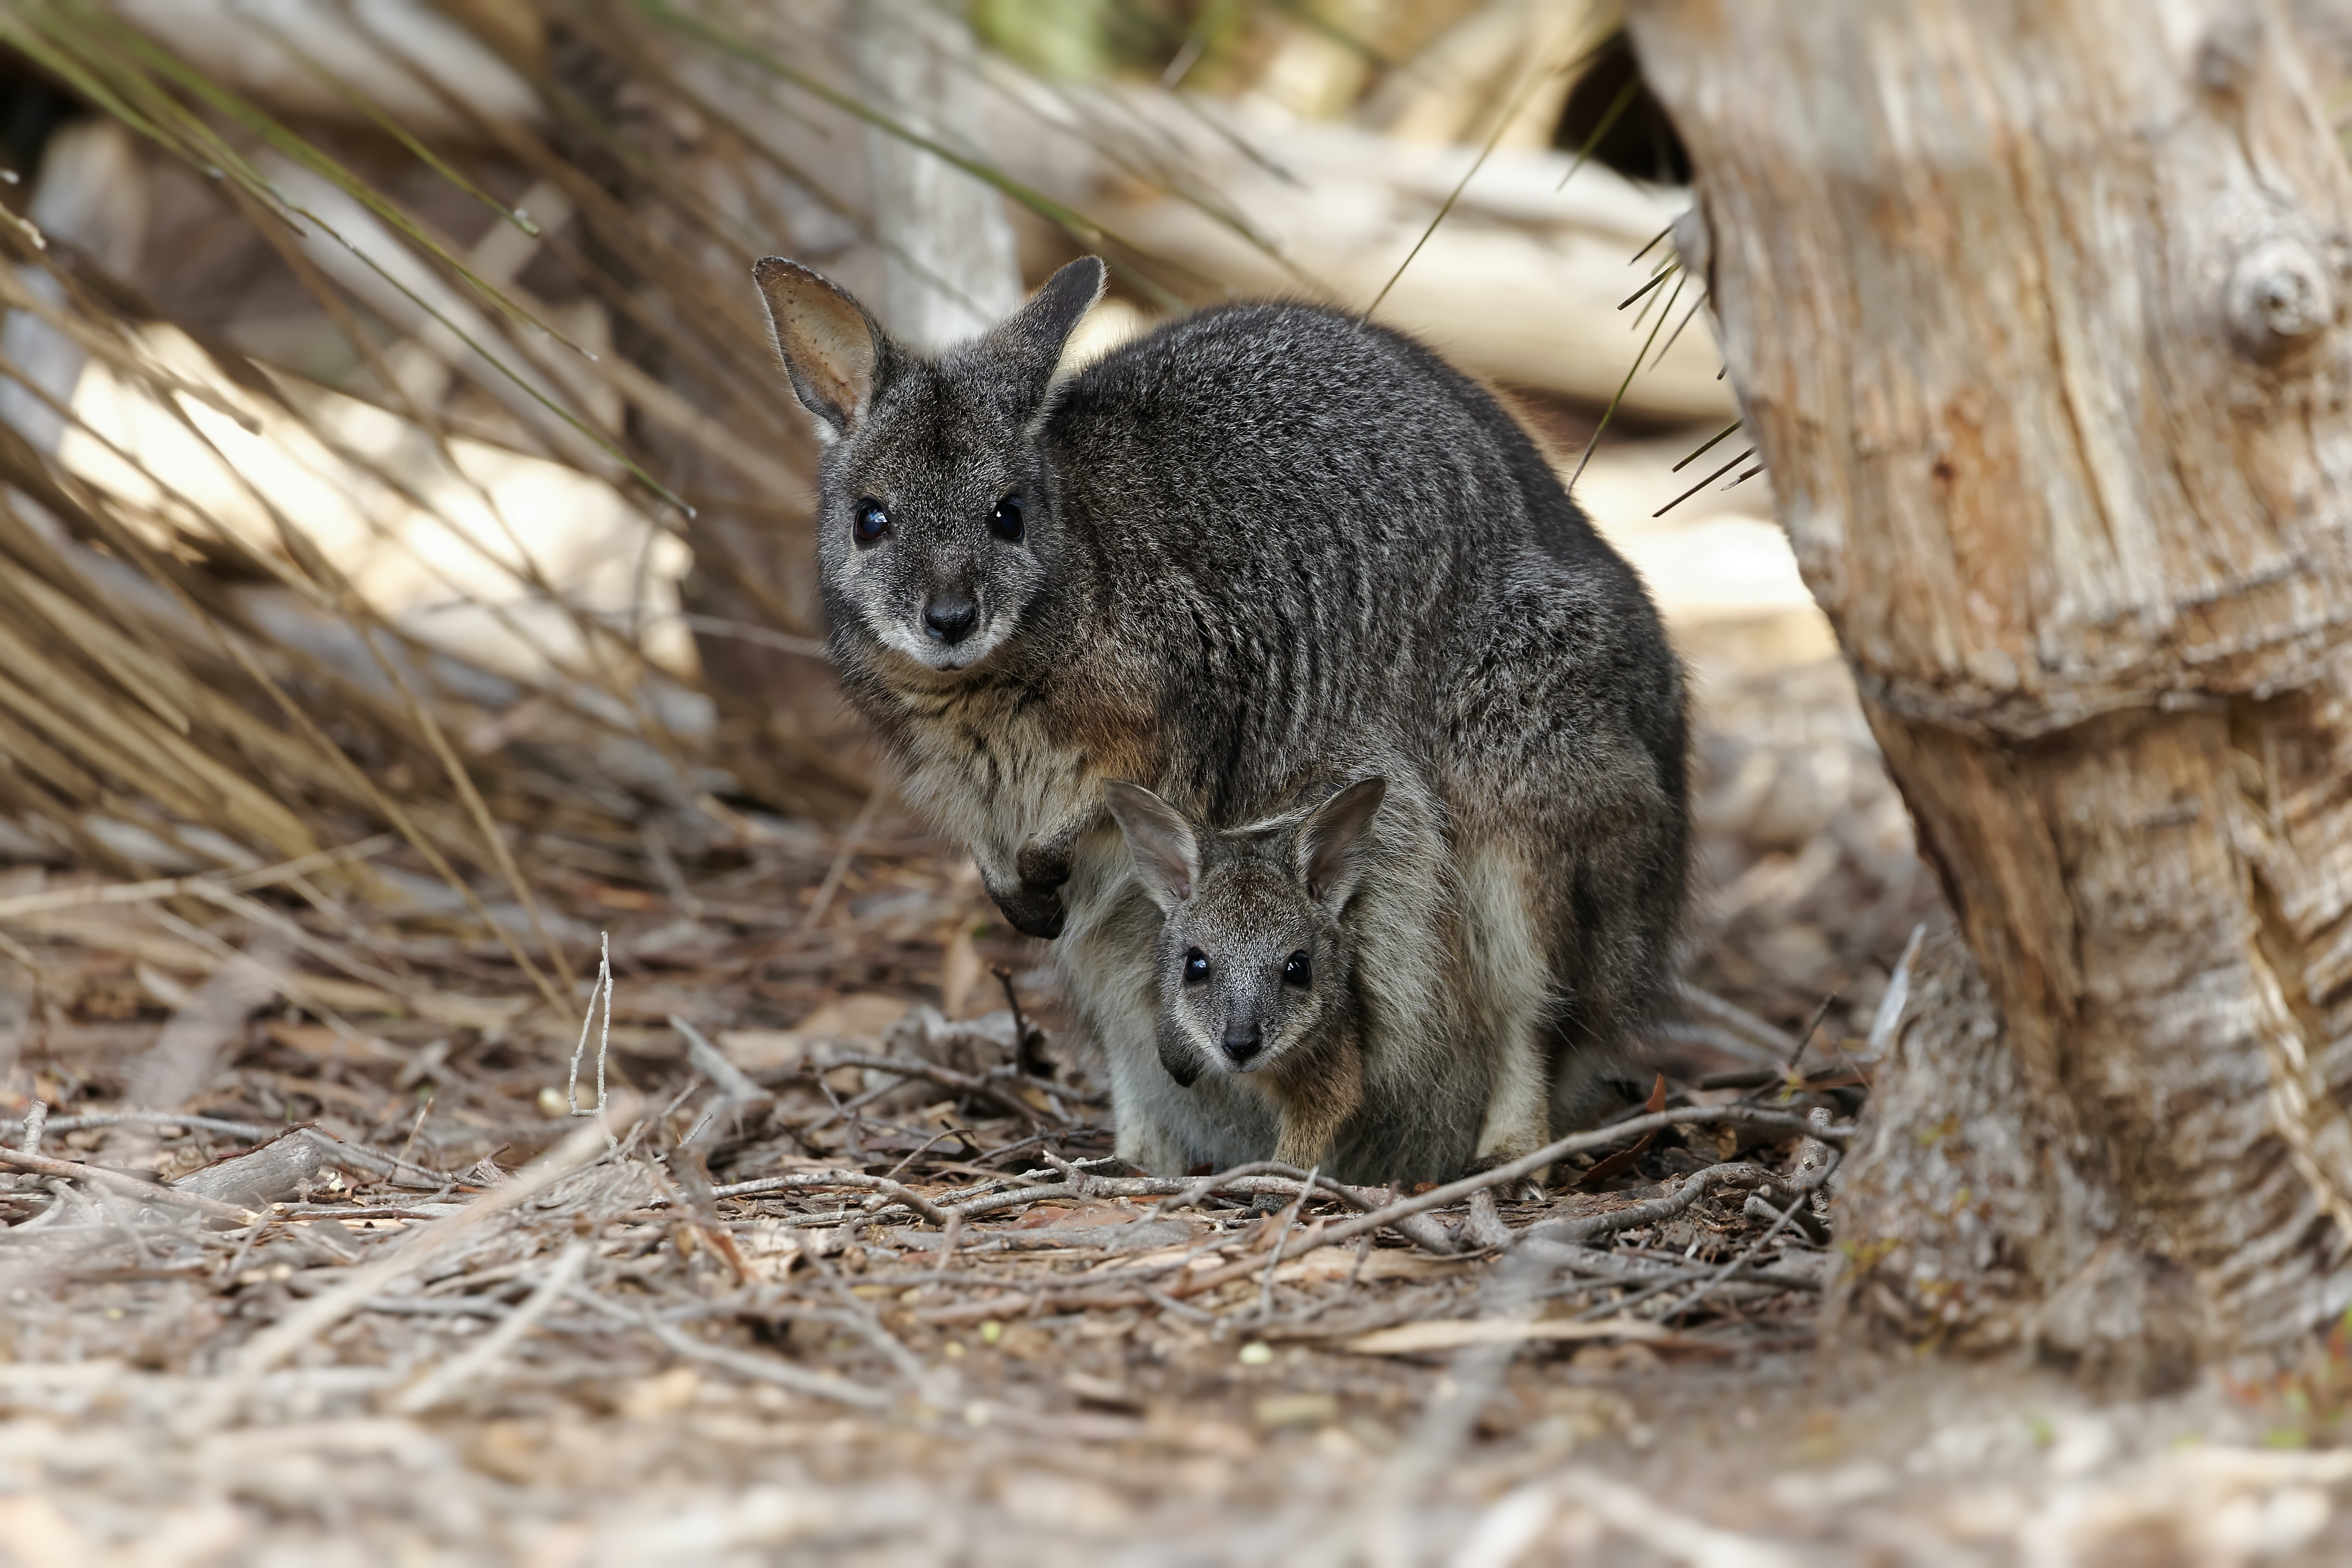 A tammar wallaby with young in its pouch.